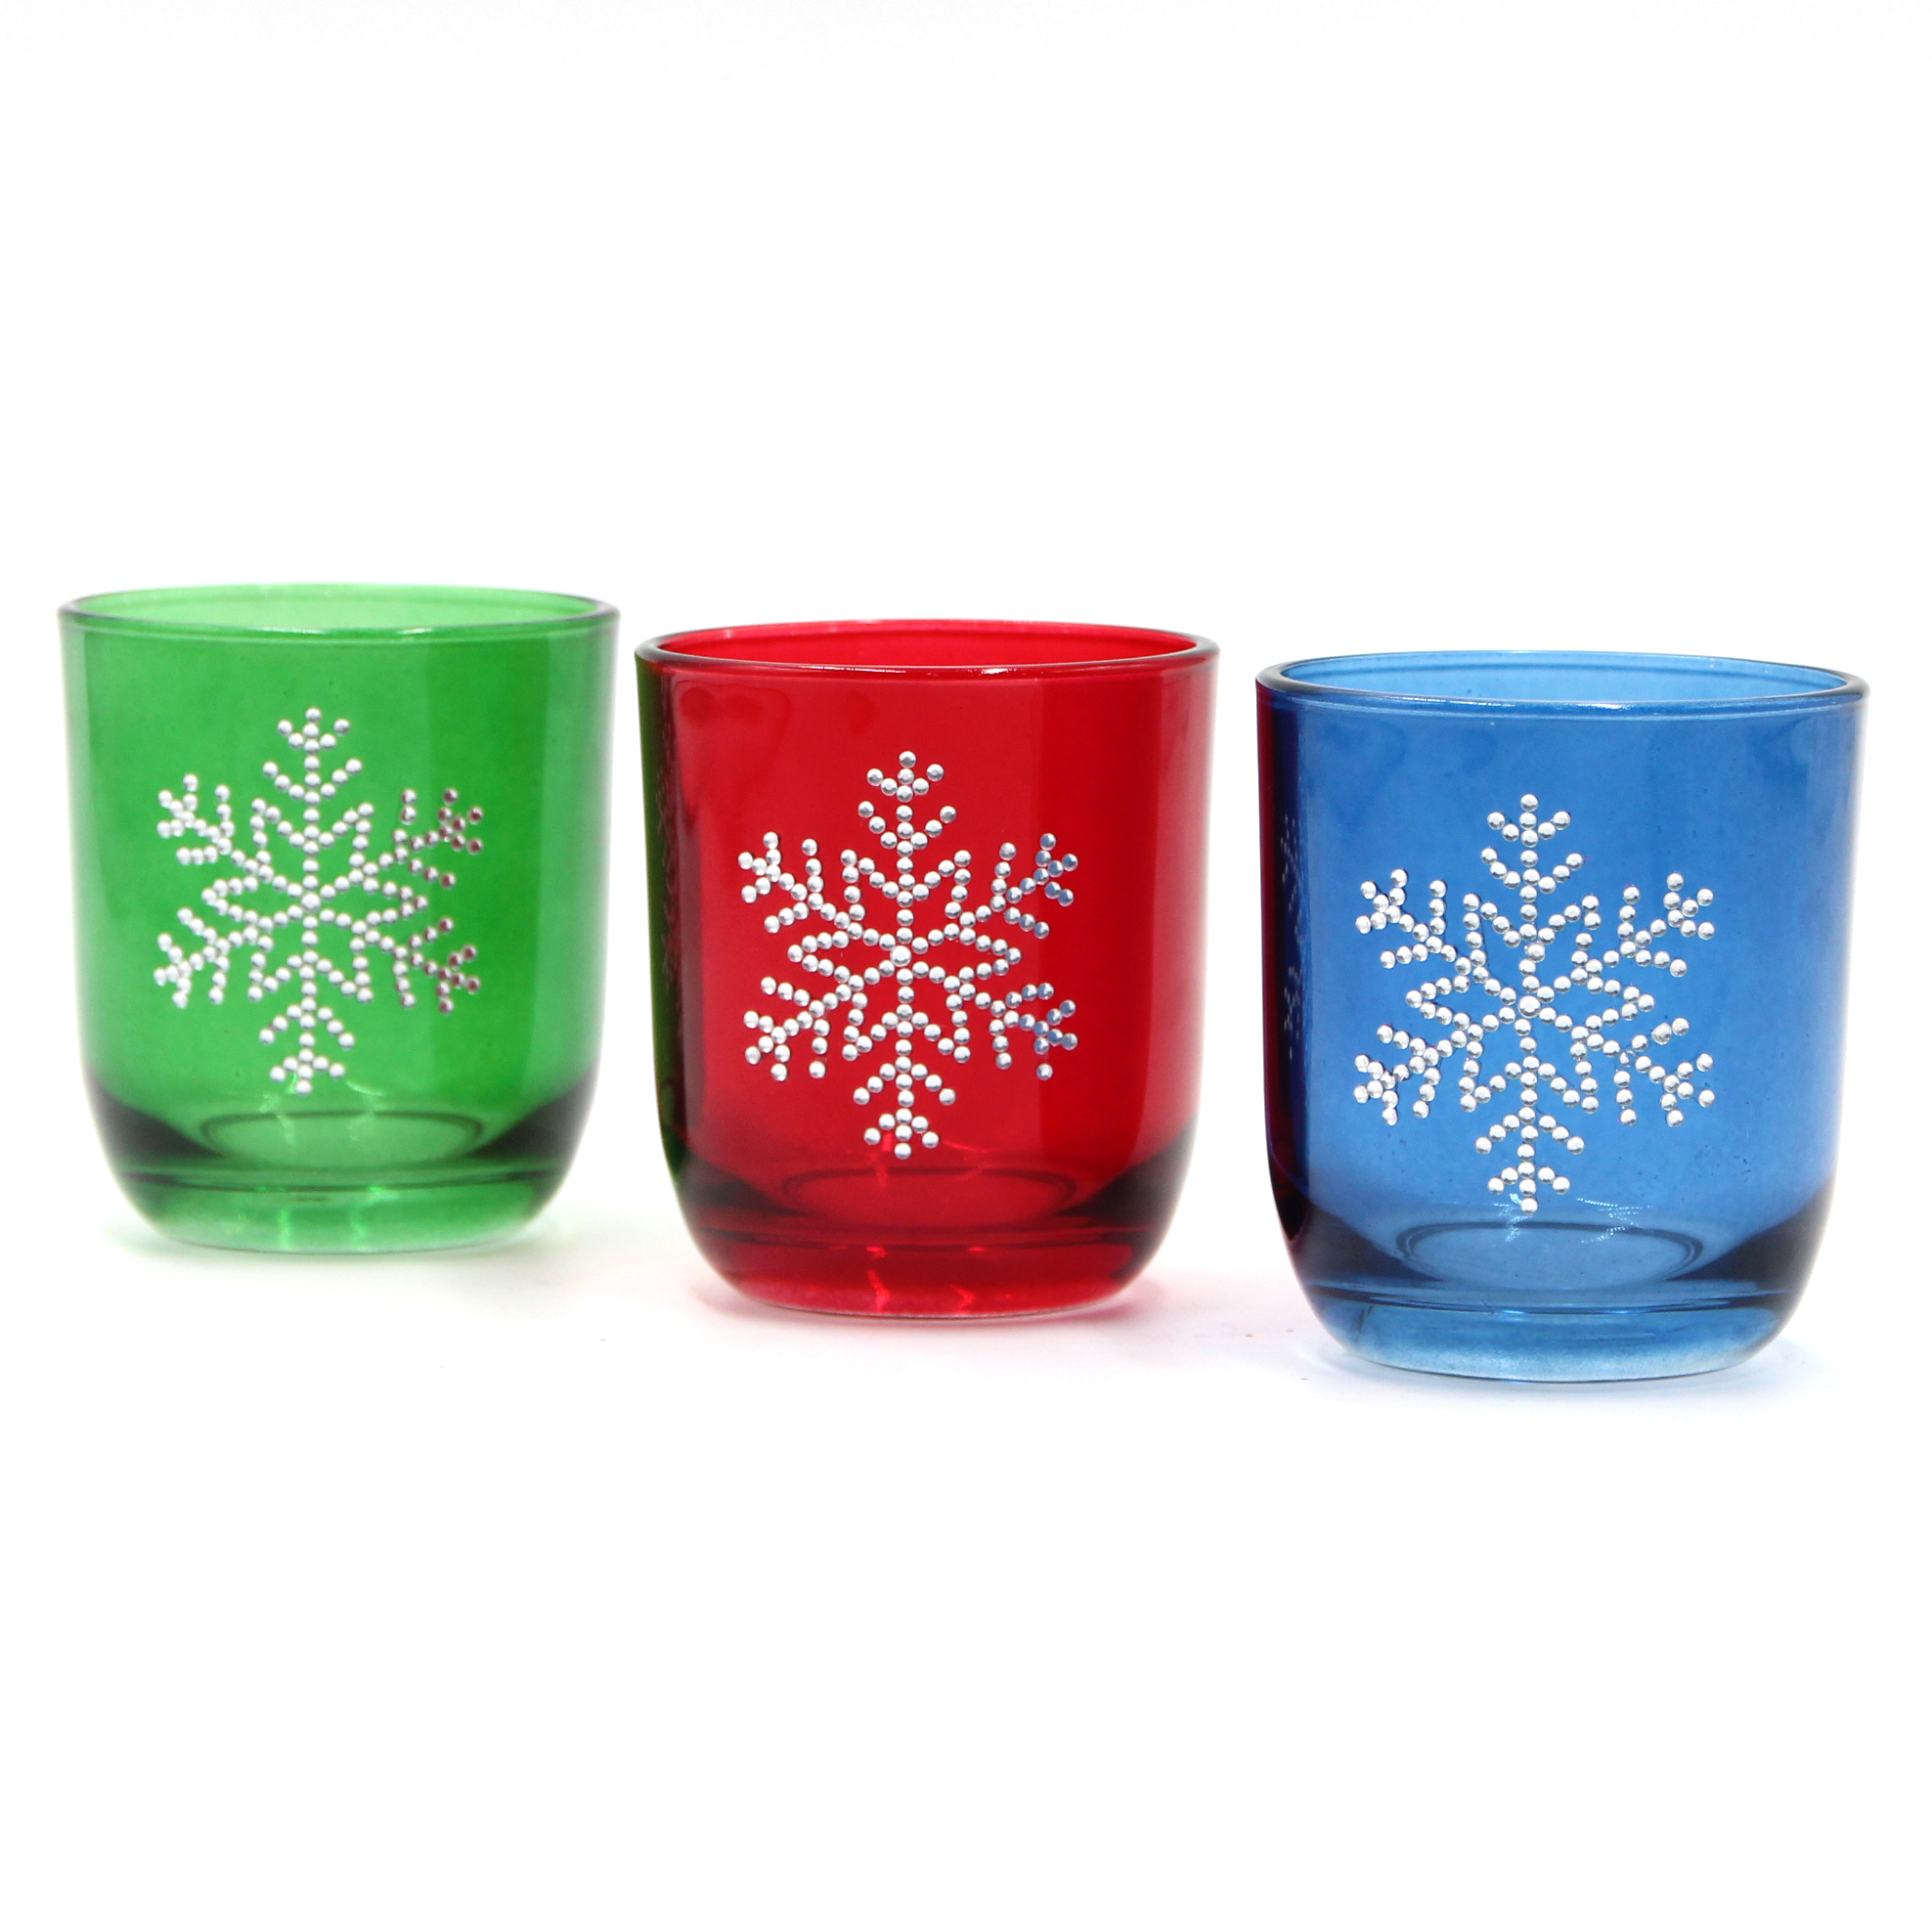 Colored Glass Tea Candle Holder for Christmas, High Quality colored